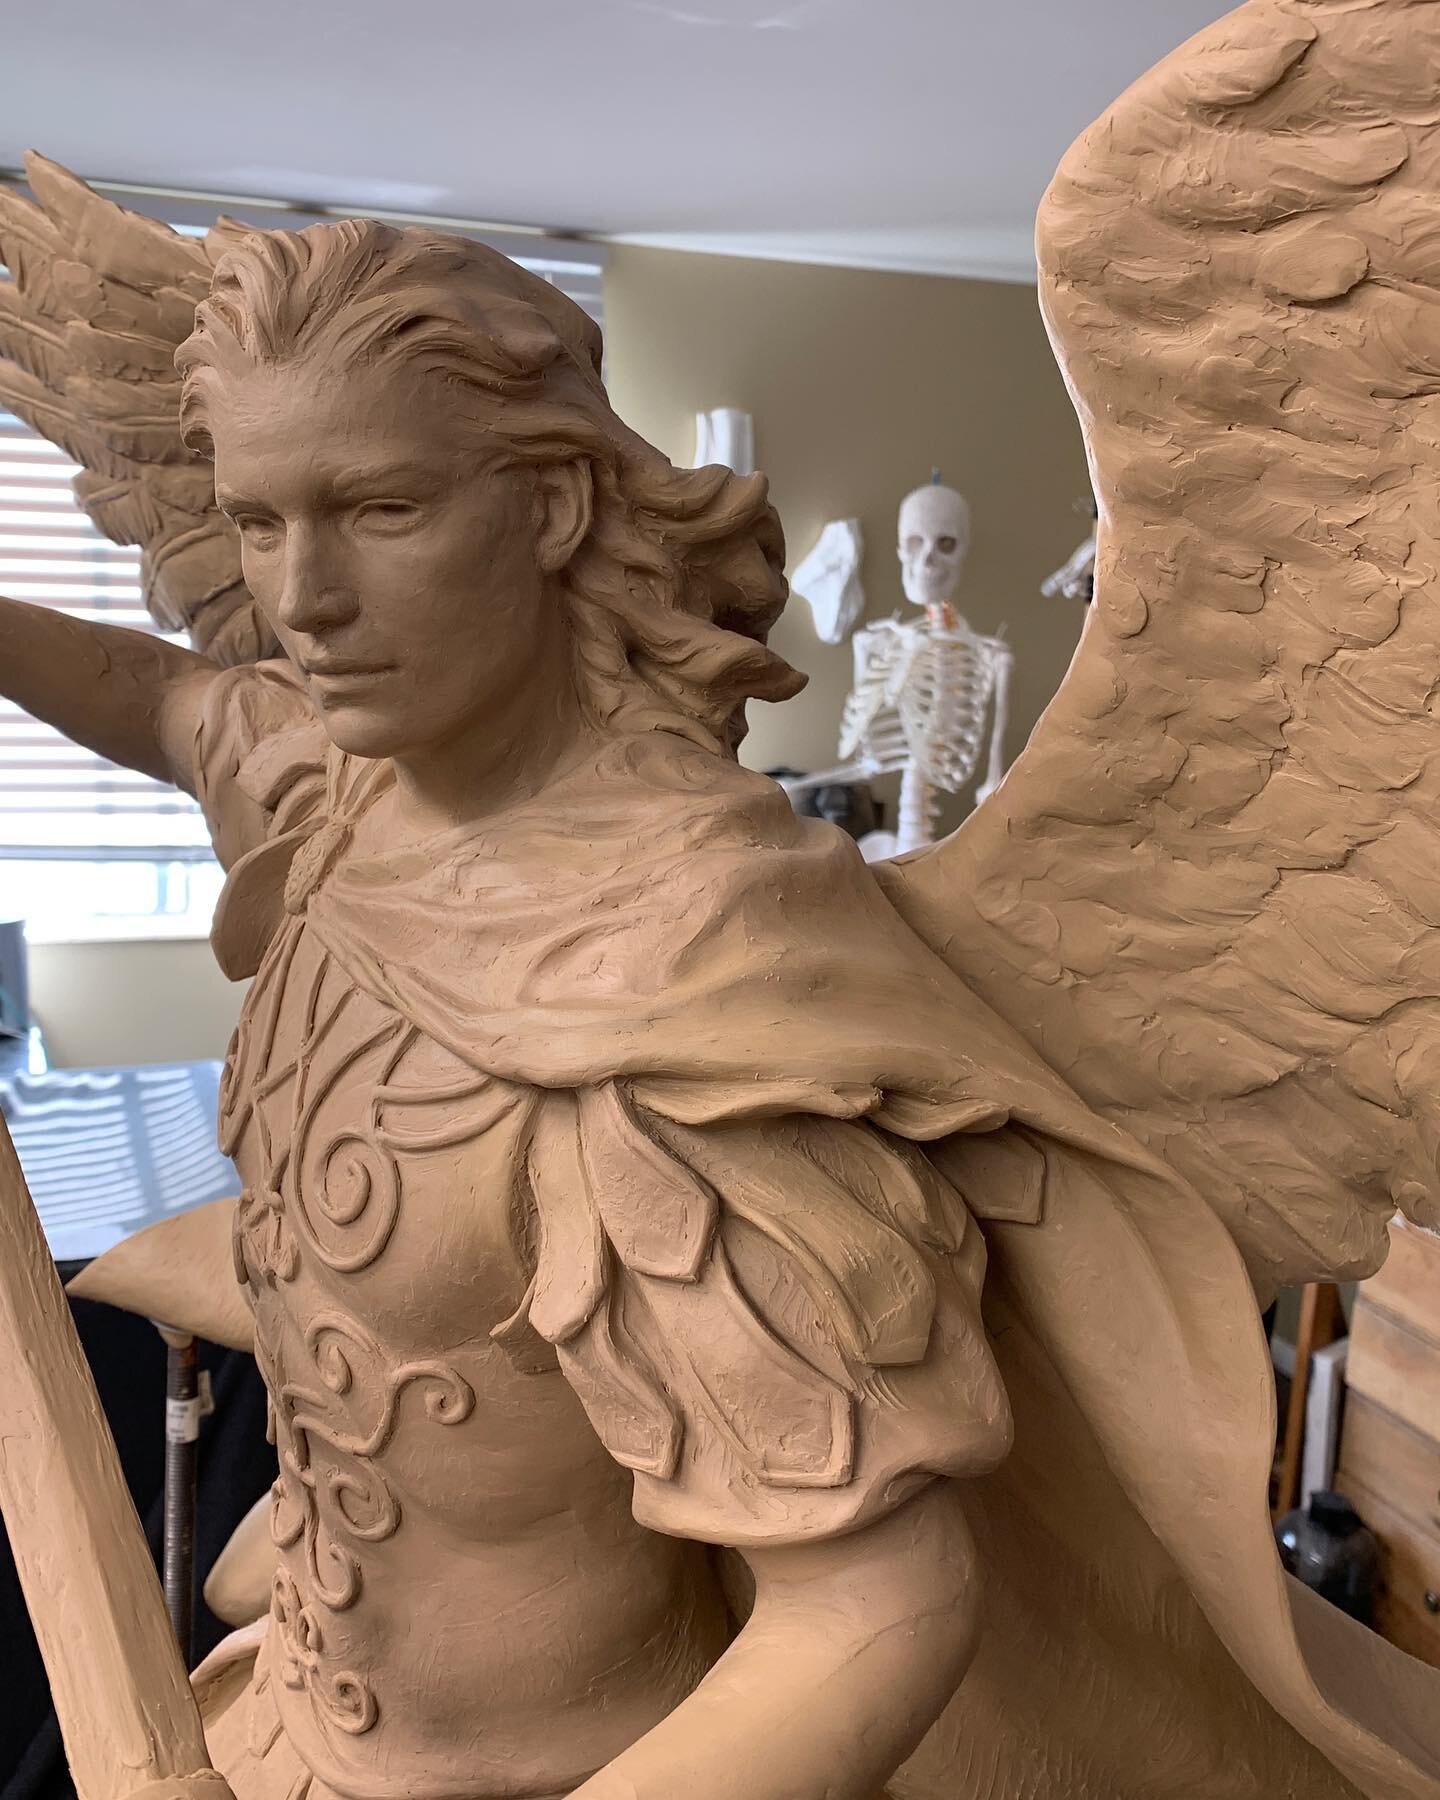 Get&rsquo;m in, get&rsquo;m out!  #bustamove #clay #copysculpt #eeesh #Neversleep #dontaskdonttell #wings #funproject #sometimesyoujustgotta